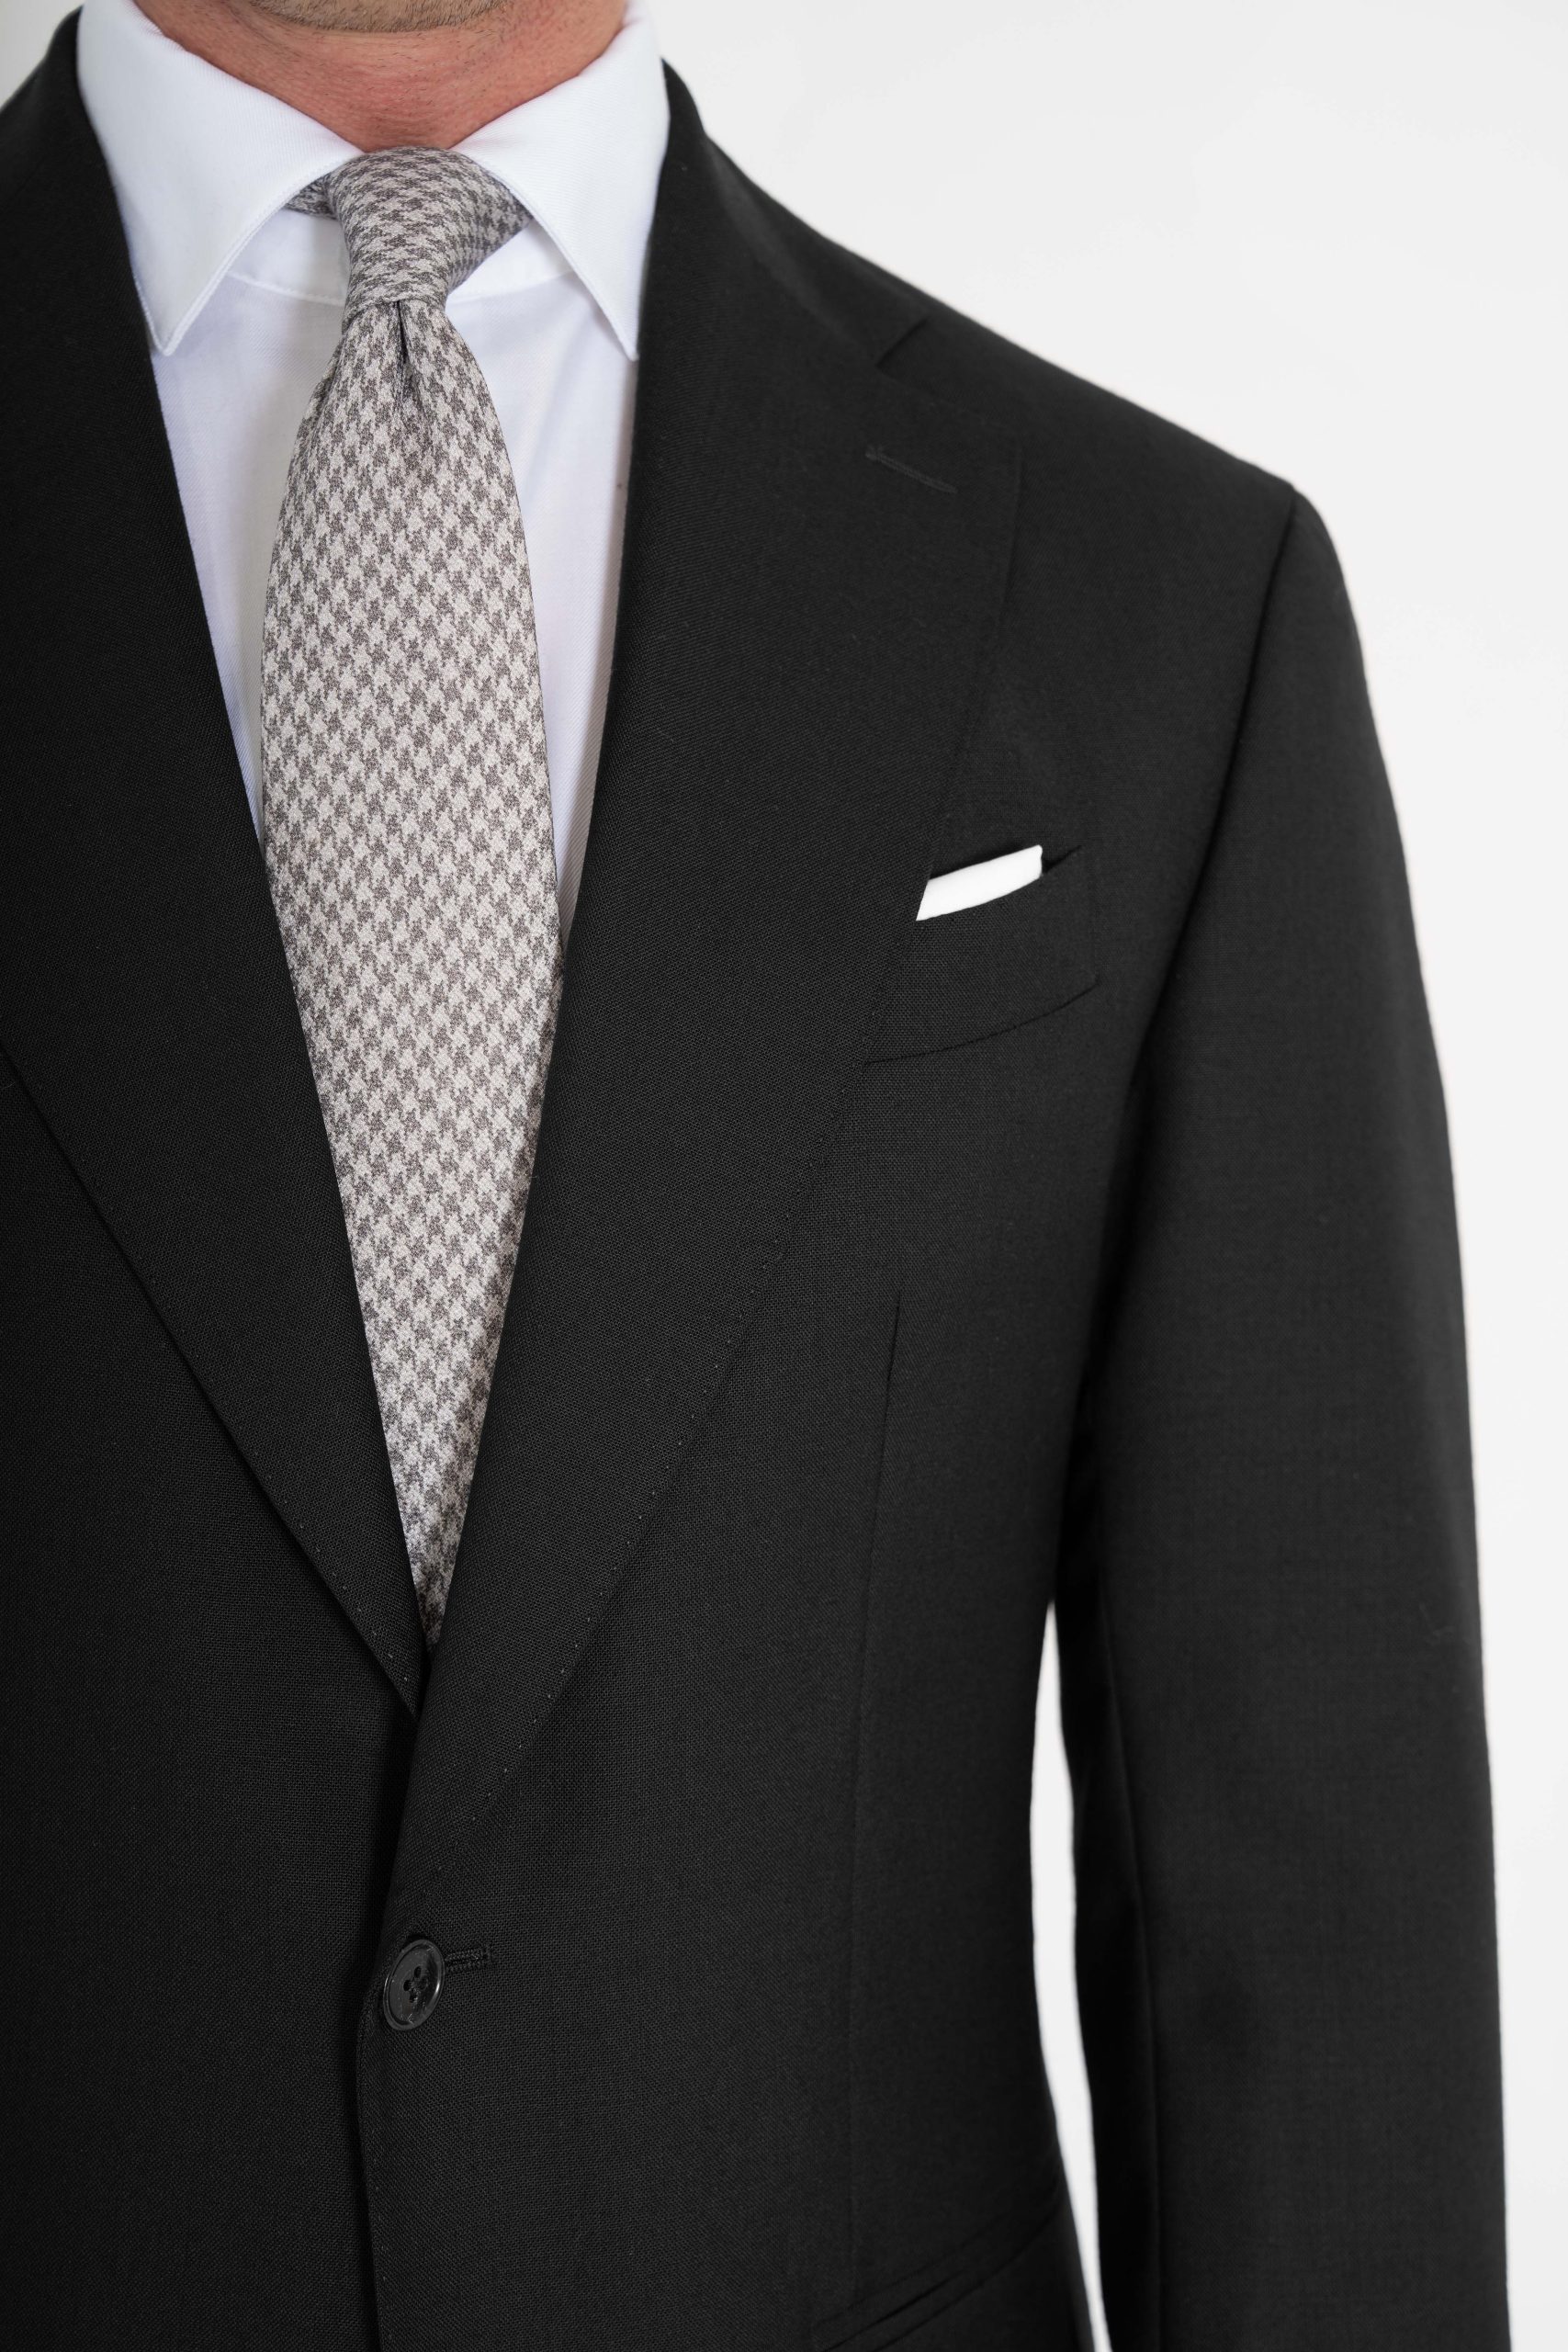 Black Suit in TwistAir™ - The breathable suit - Mond